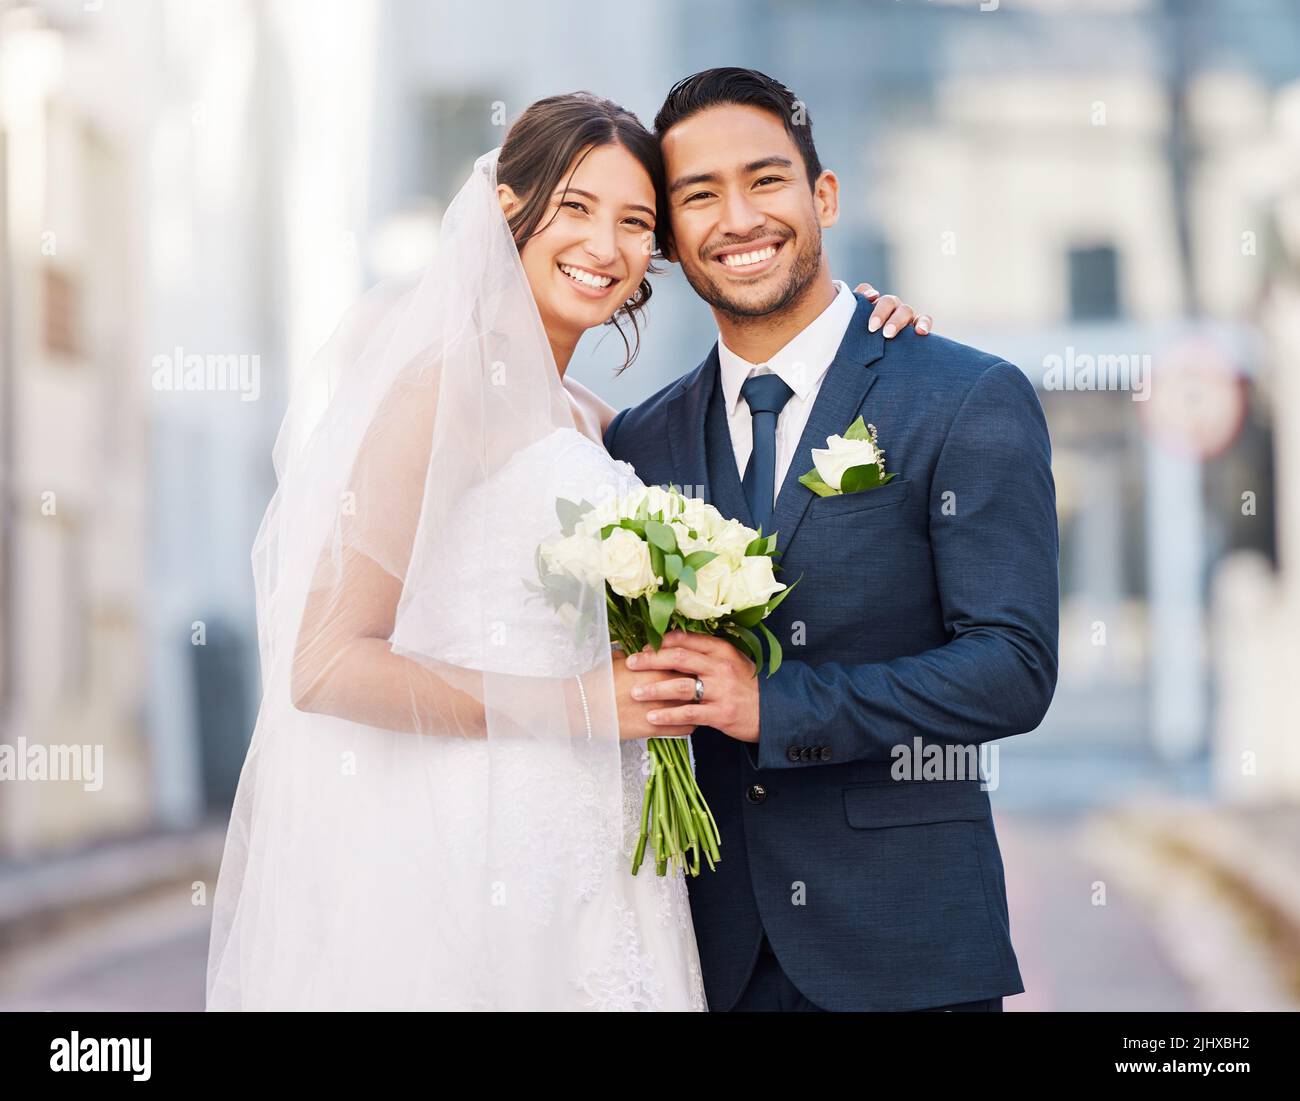 Where there is love there is life. a beautiful couple out in the city on their wedding day. Stock Photo